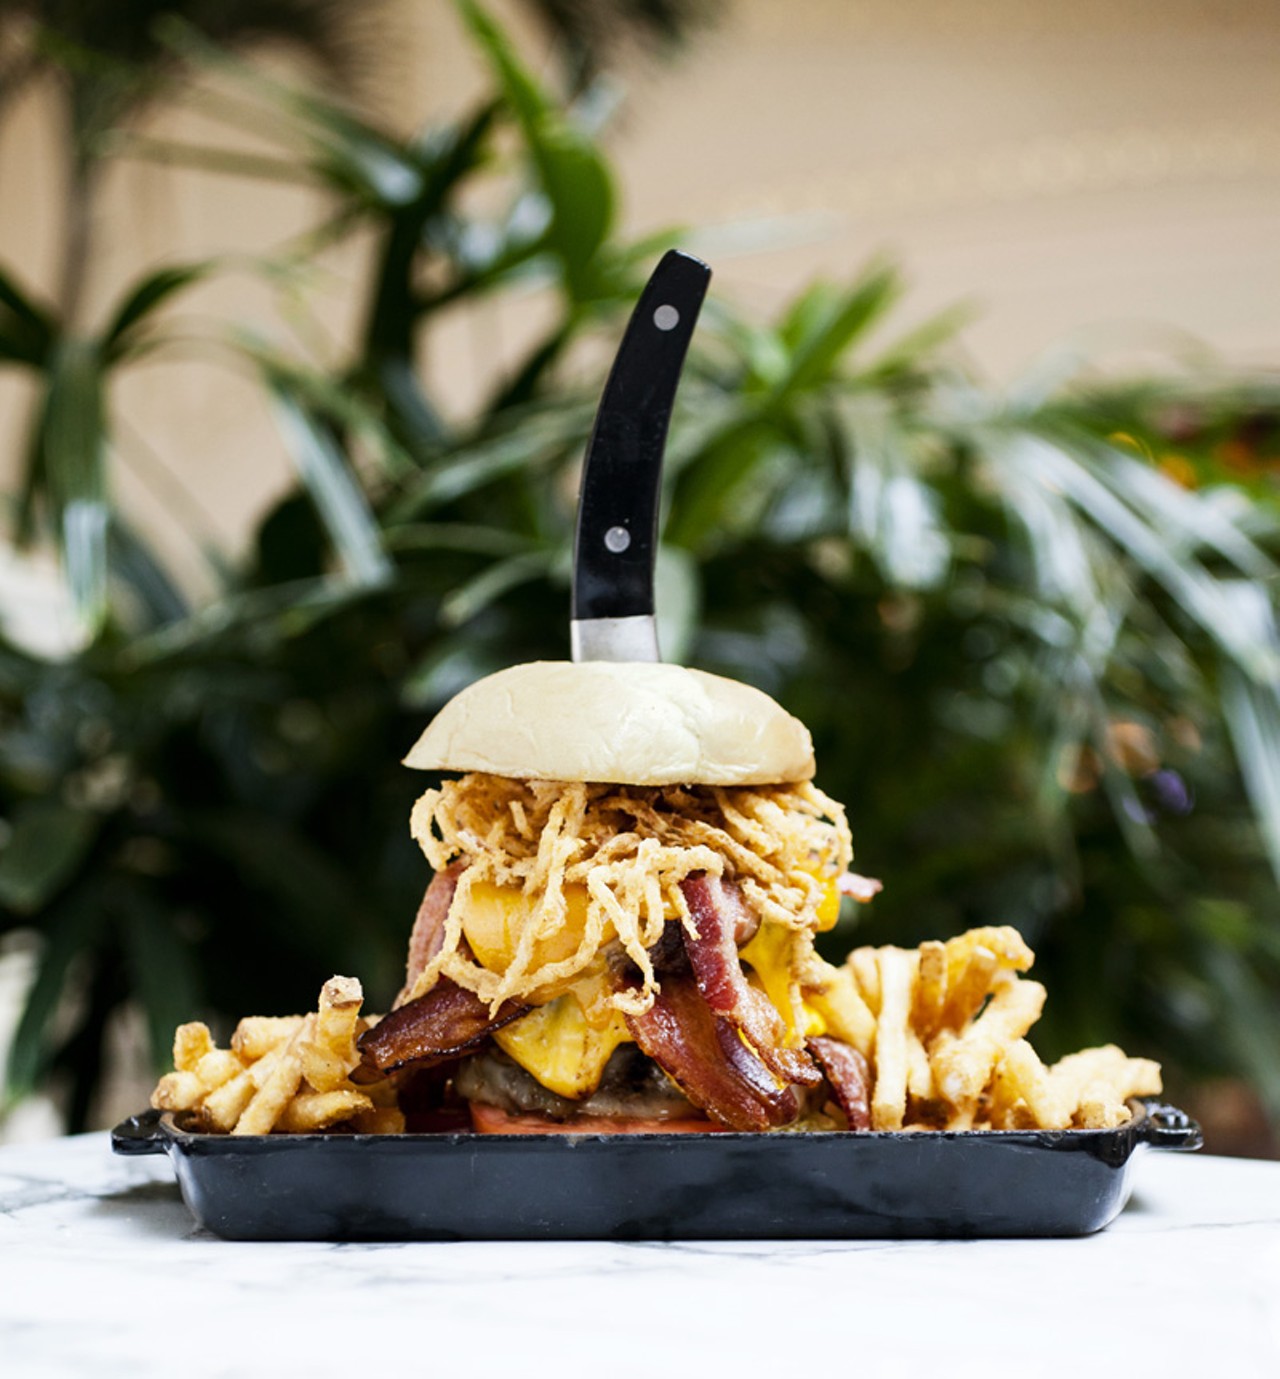 The Triple Bypass is three, yes count 'em, three 8 ounce Angus burgers with six strips of applewood smoked bacon, tomatoes, fried onion straws, mayonnaise, house-made steak sauce and your choice of three cheeses.